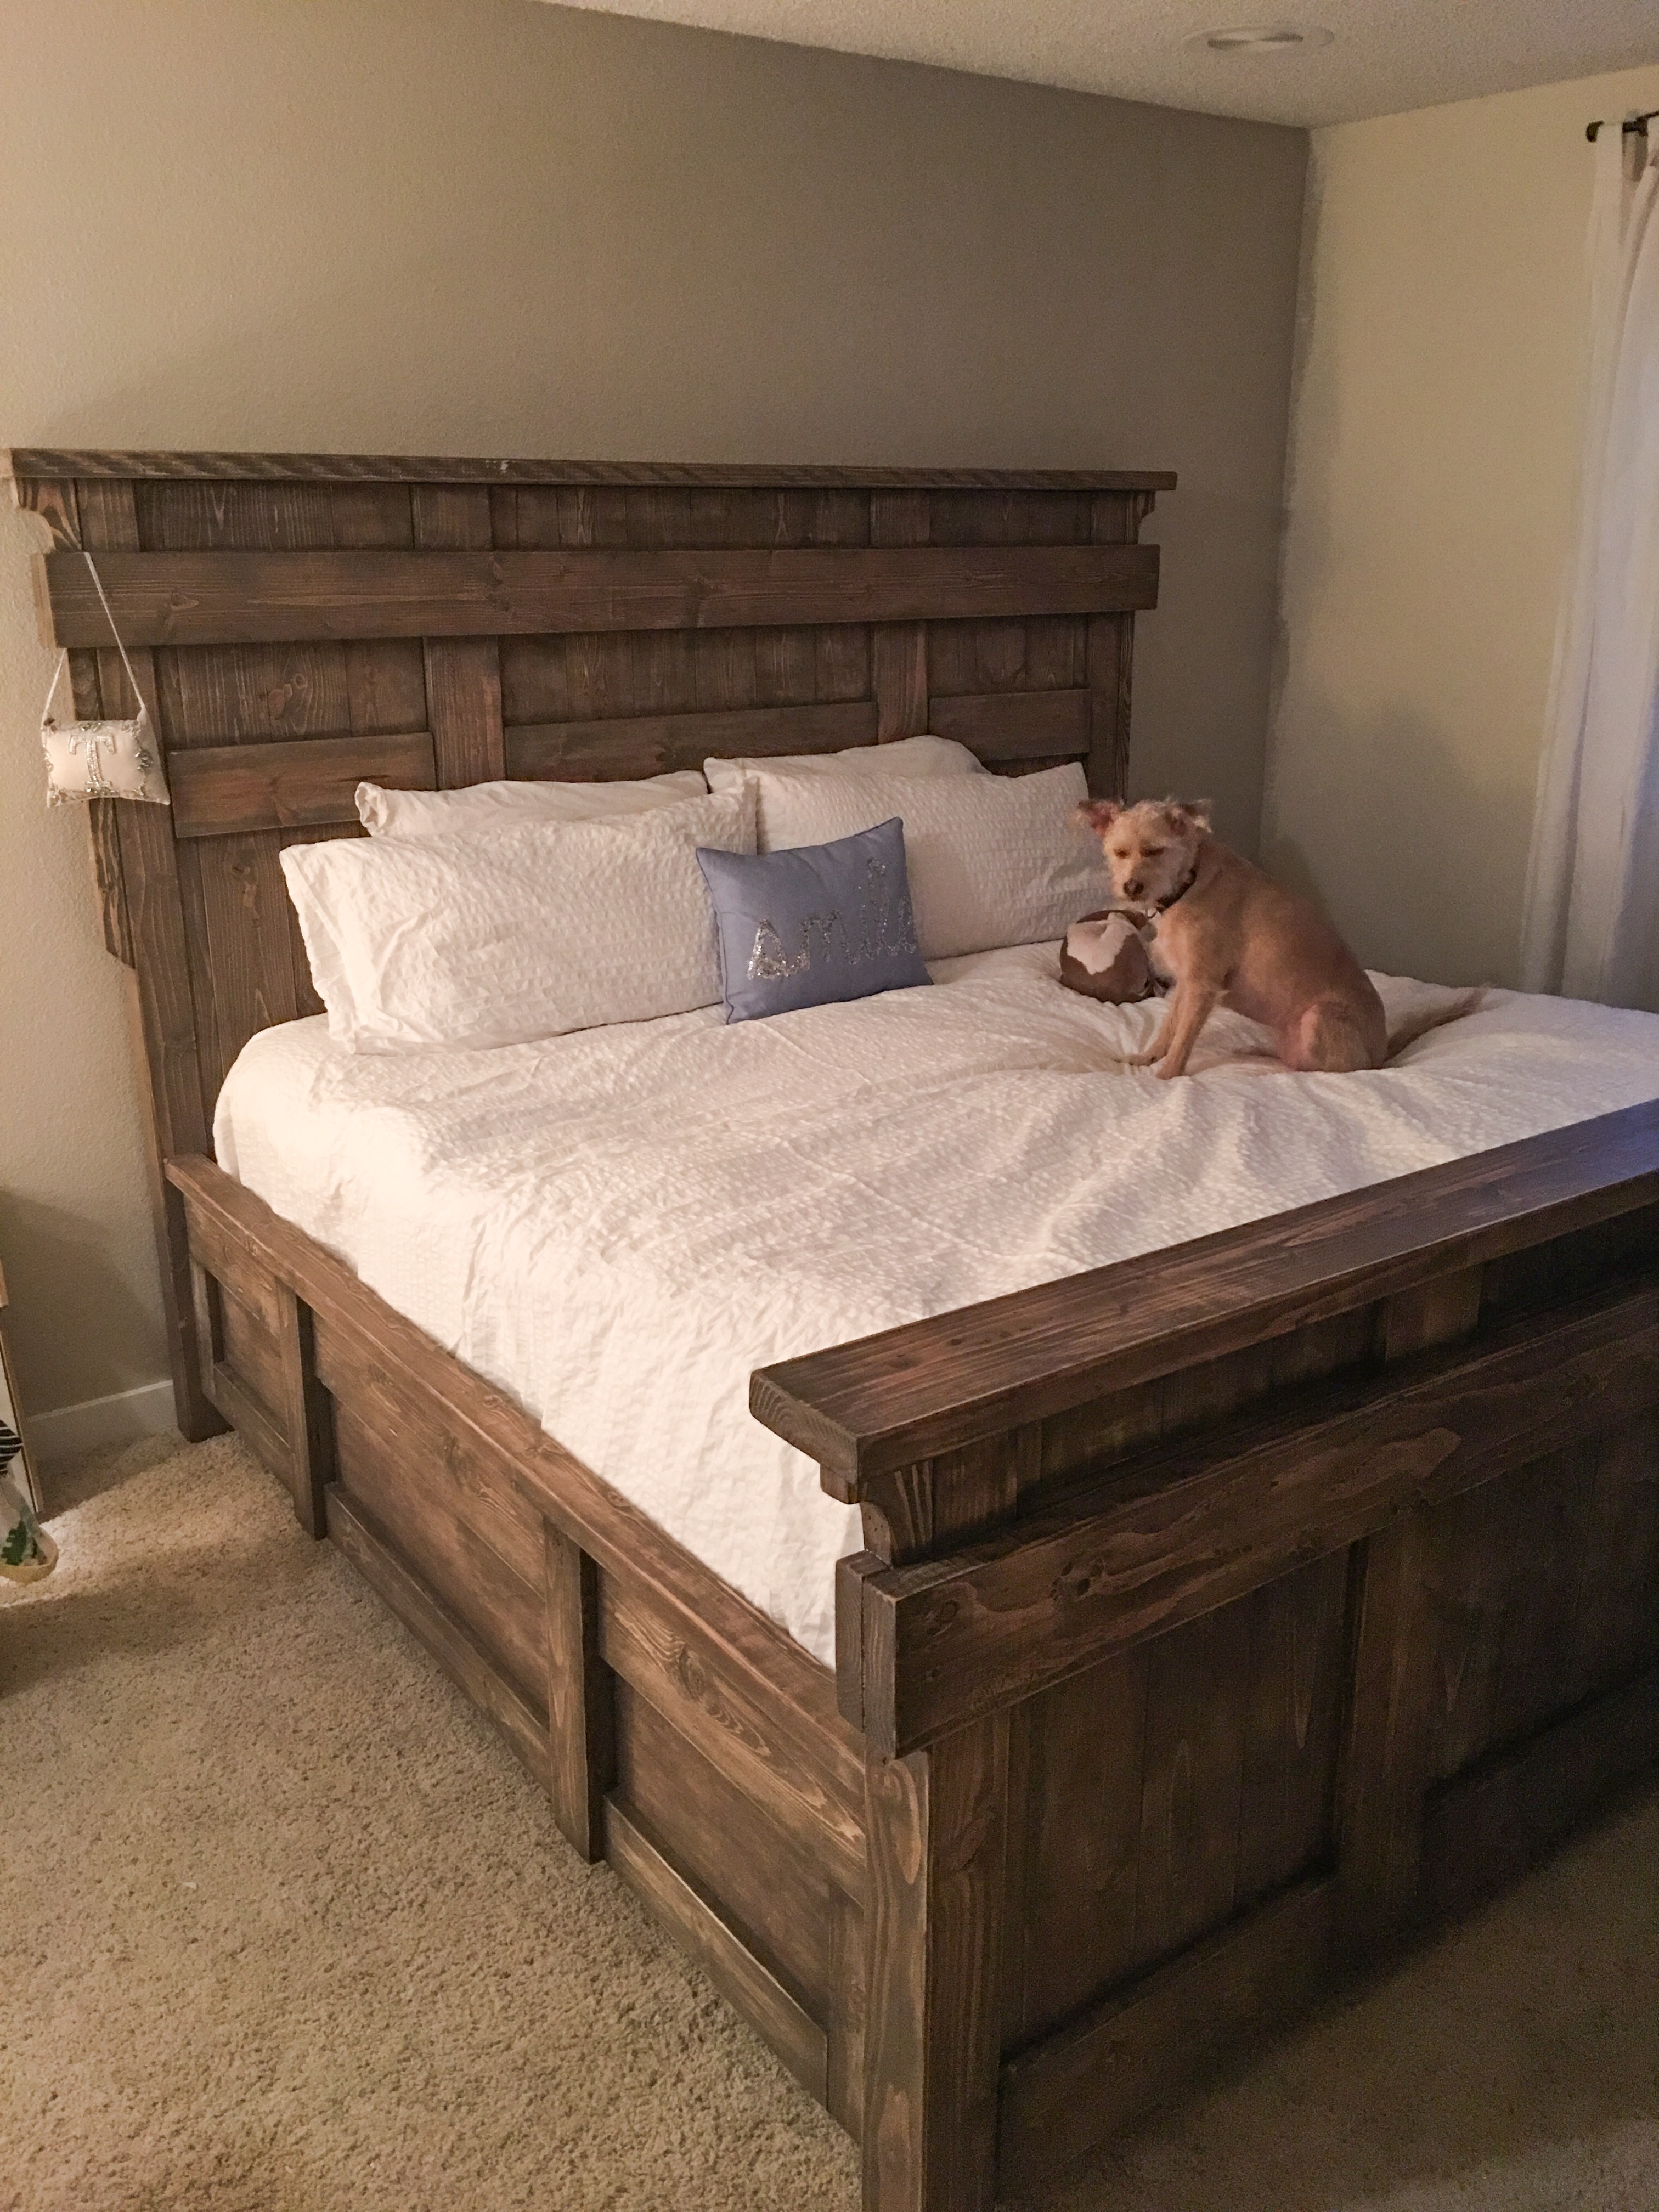 DIY King Size Bed Free Plans - Shanty 2 Chic